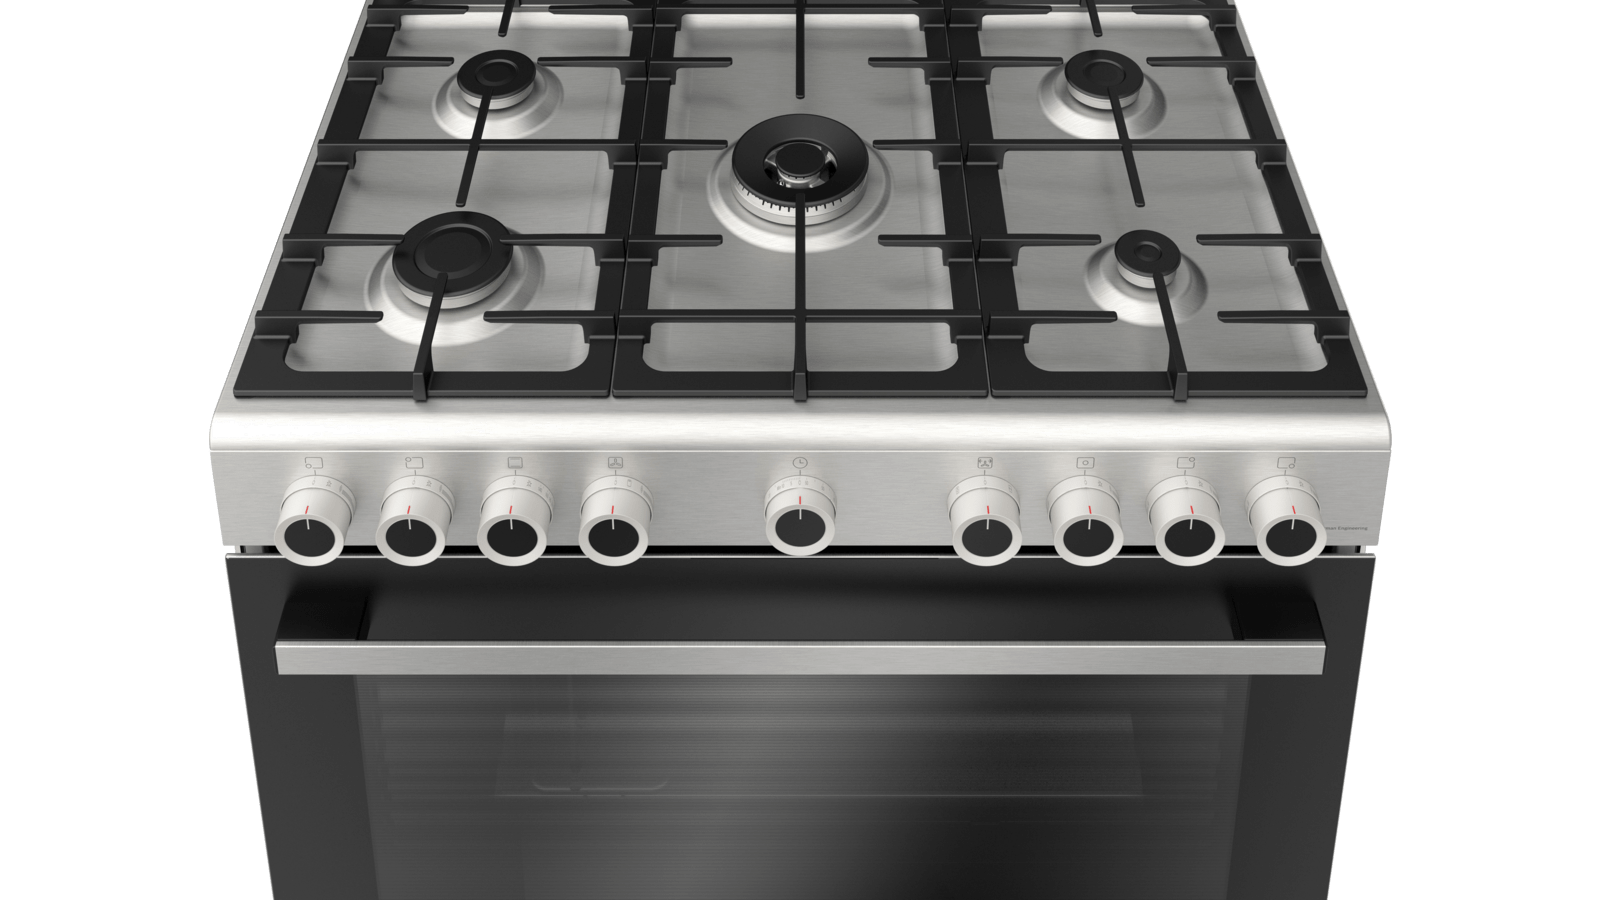 BOSCH Gas Cooker 90cm 5 Burners - Stainless Steel